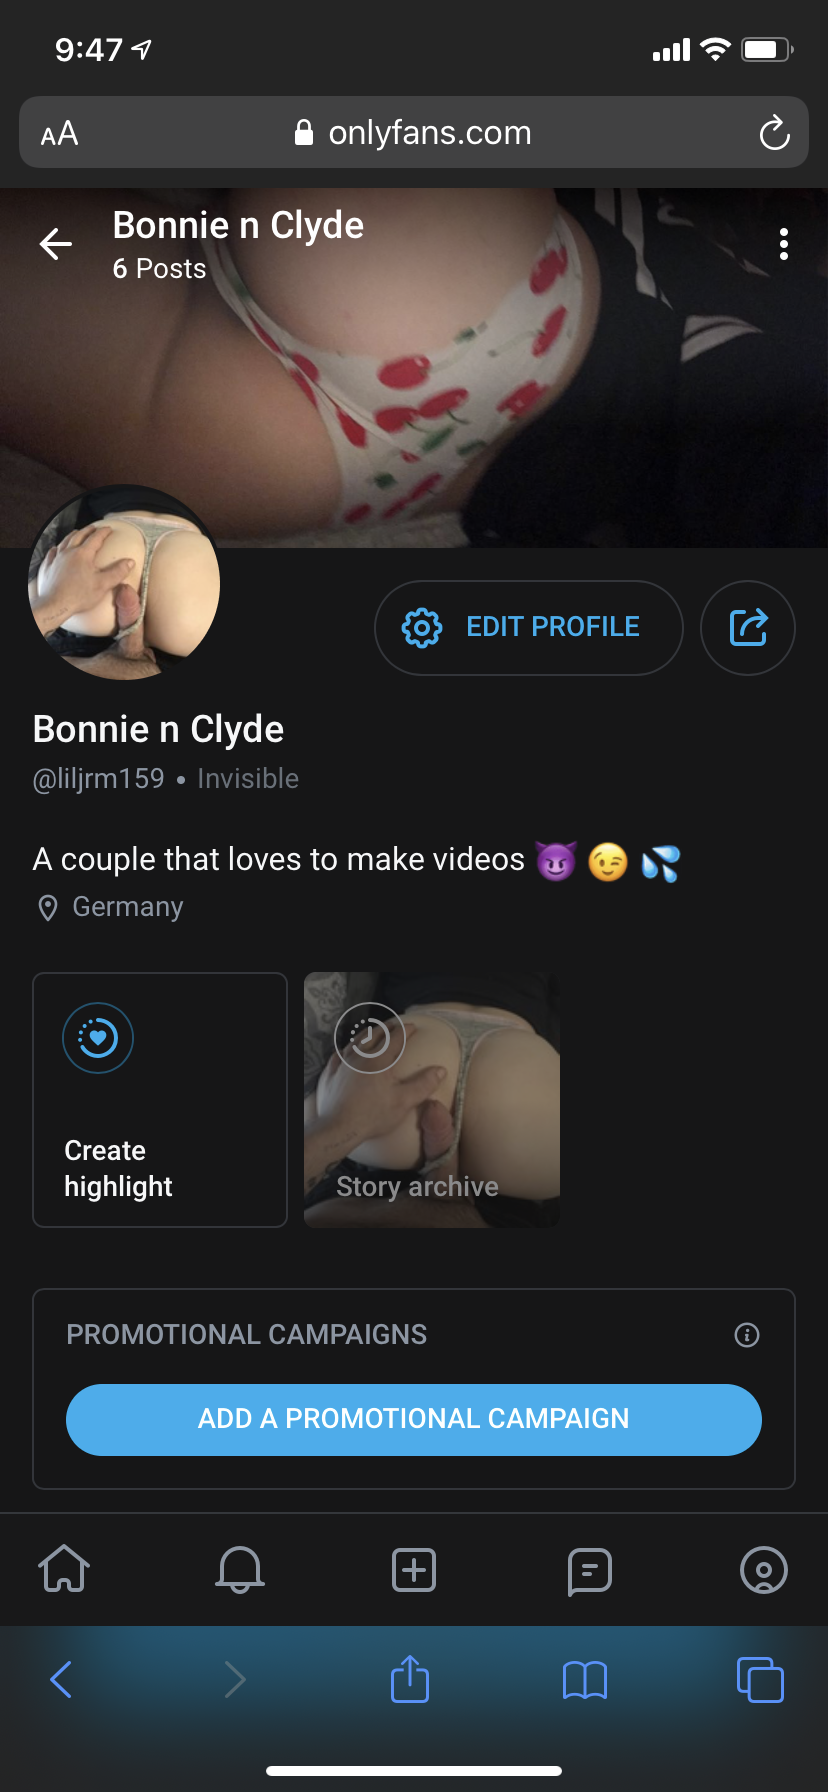 Photo by Bonnie n clyde with the username @liljman58, posted on August 26, 2020